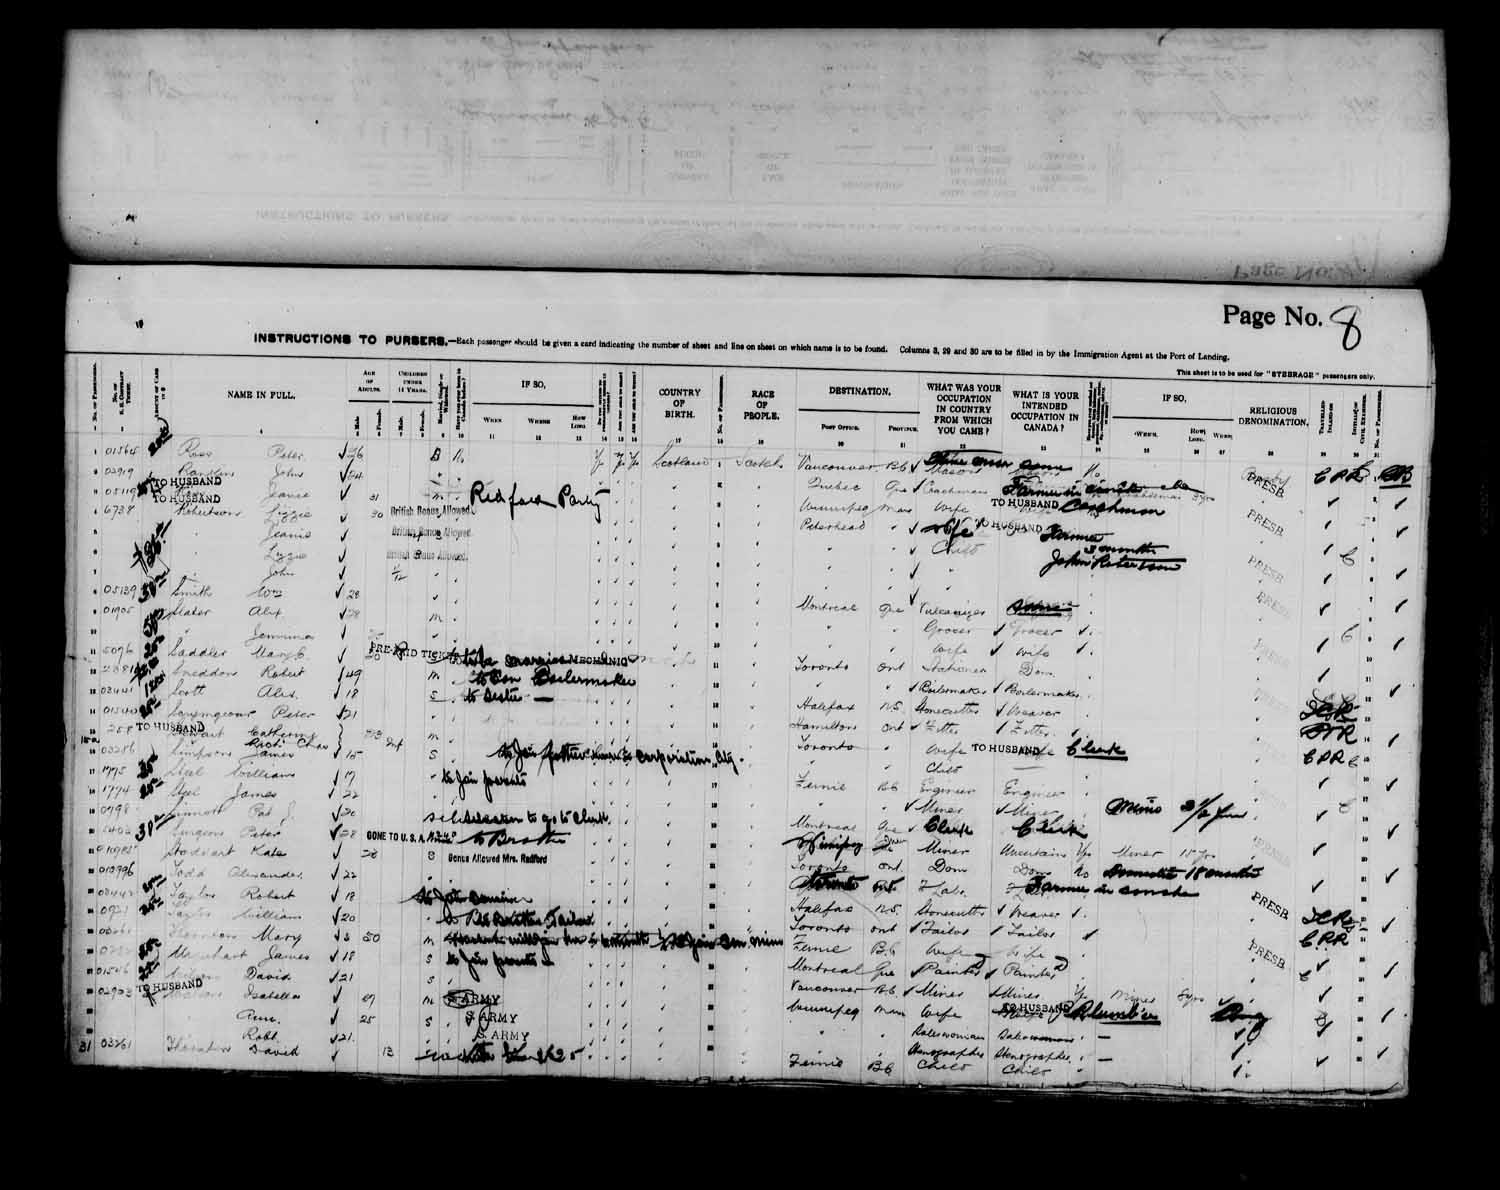 Digitized page of Passenger Lists for Image No.: e003566527